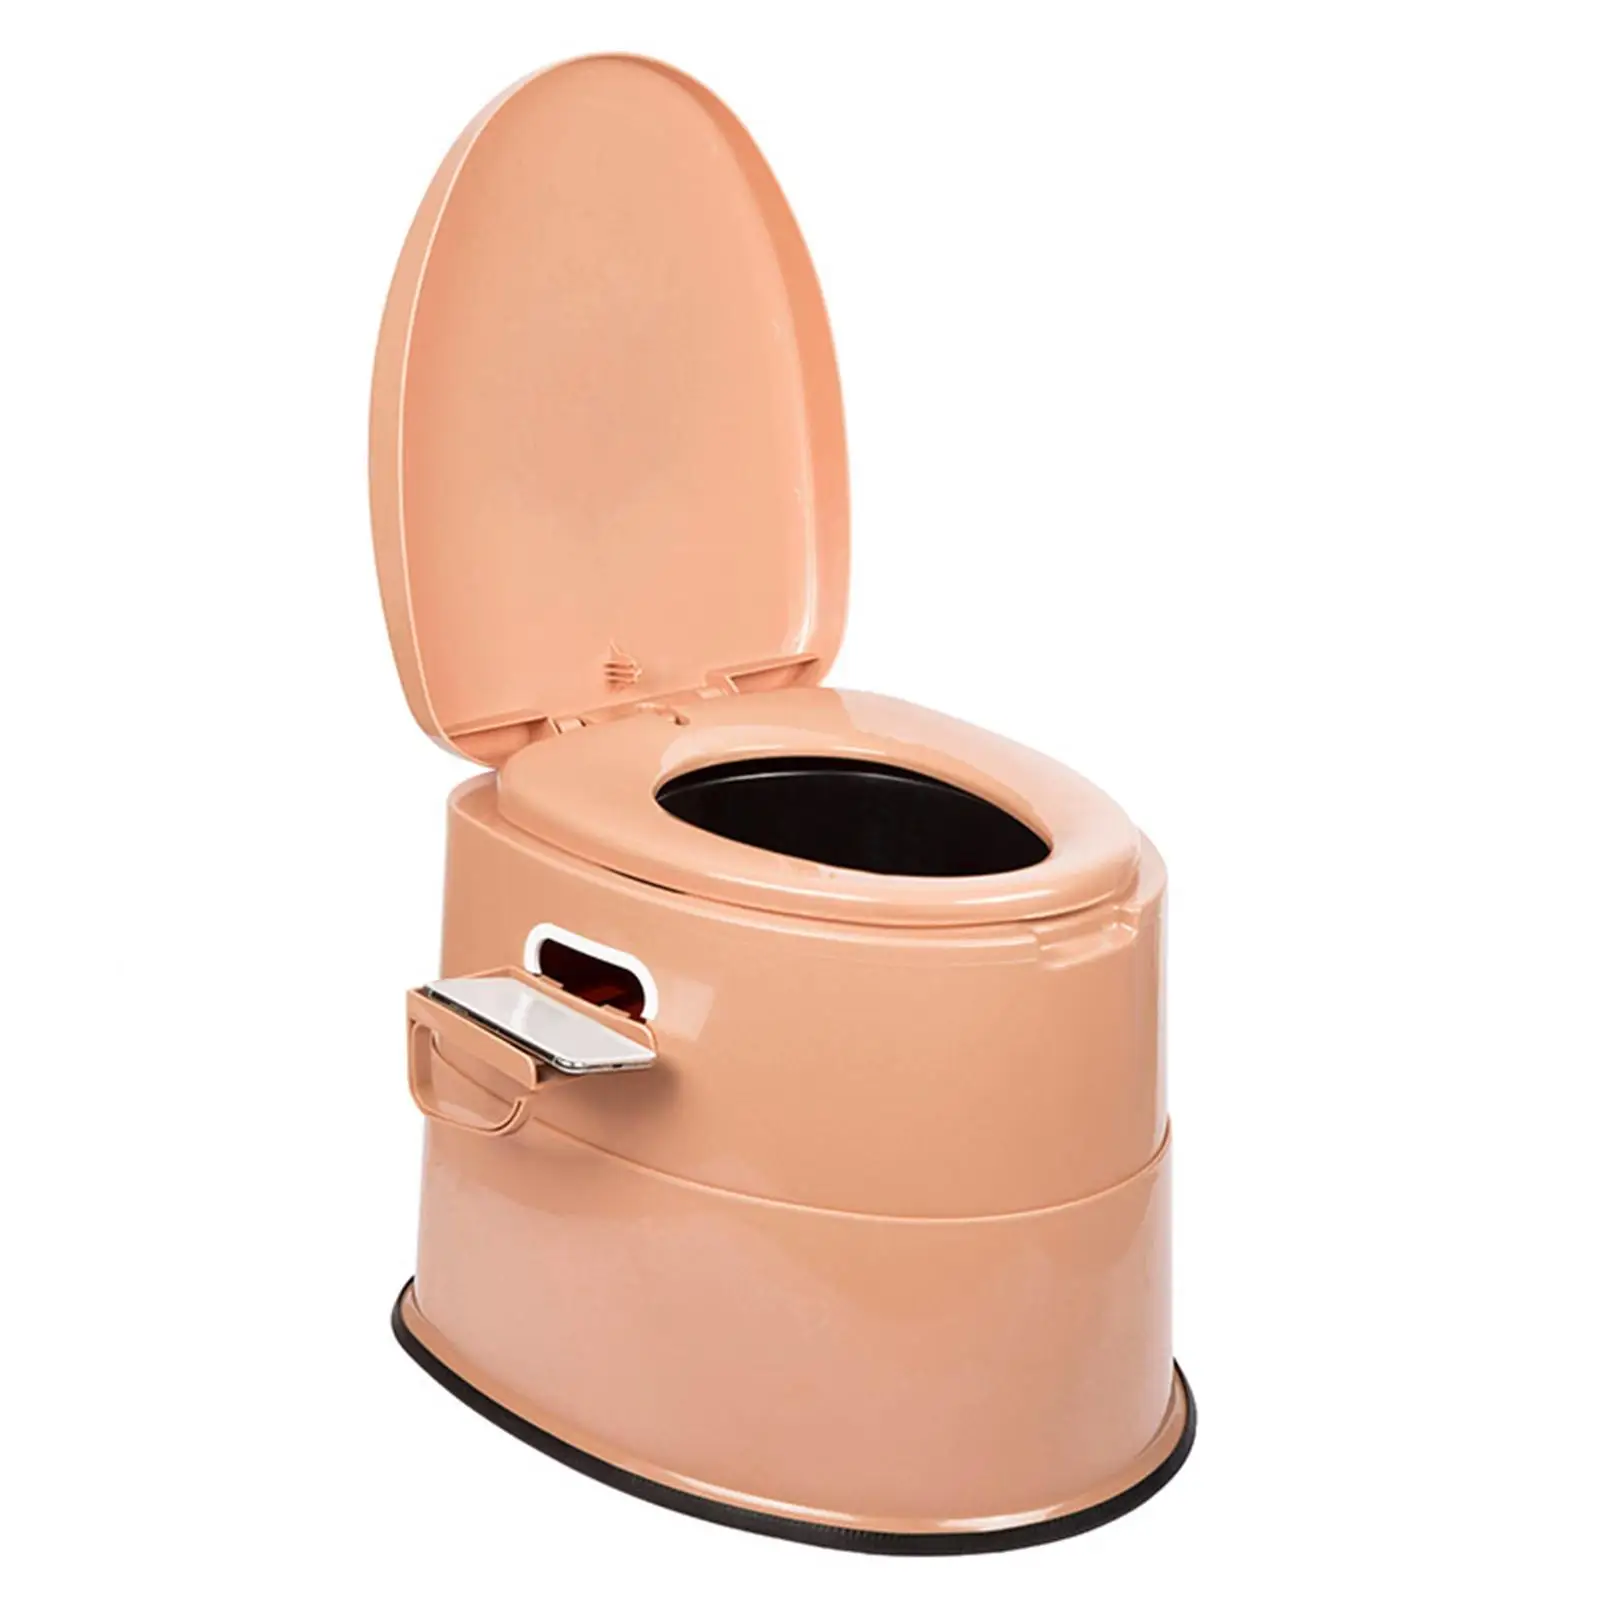 Travel Toilet Lightweight Removable Toilet Paper Holder Waterproof Sturdy Portable Toilet for Trips Camping Home Outdoor Indoor